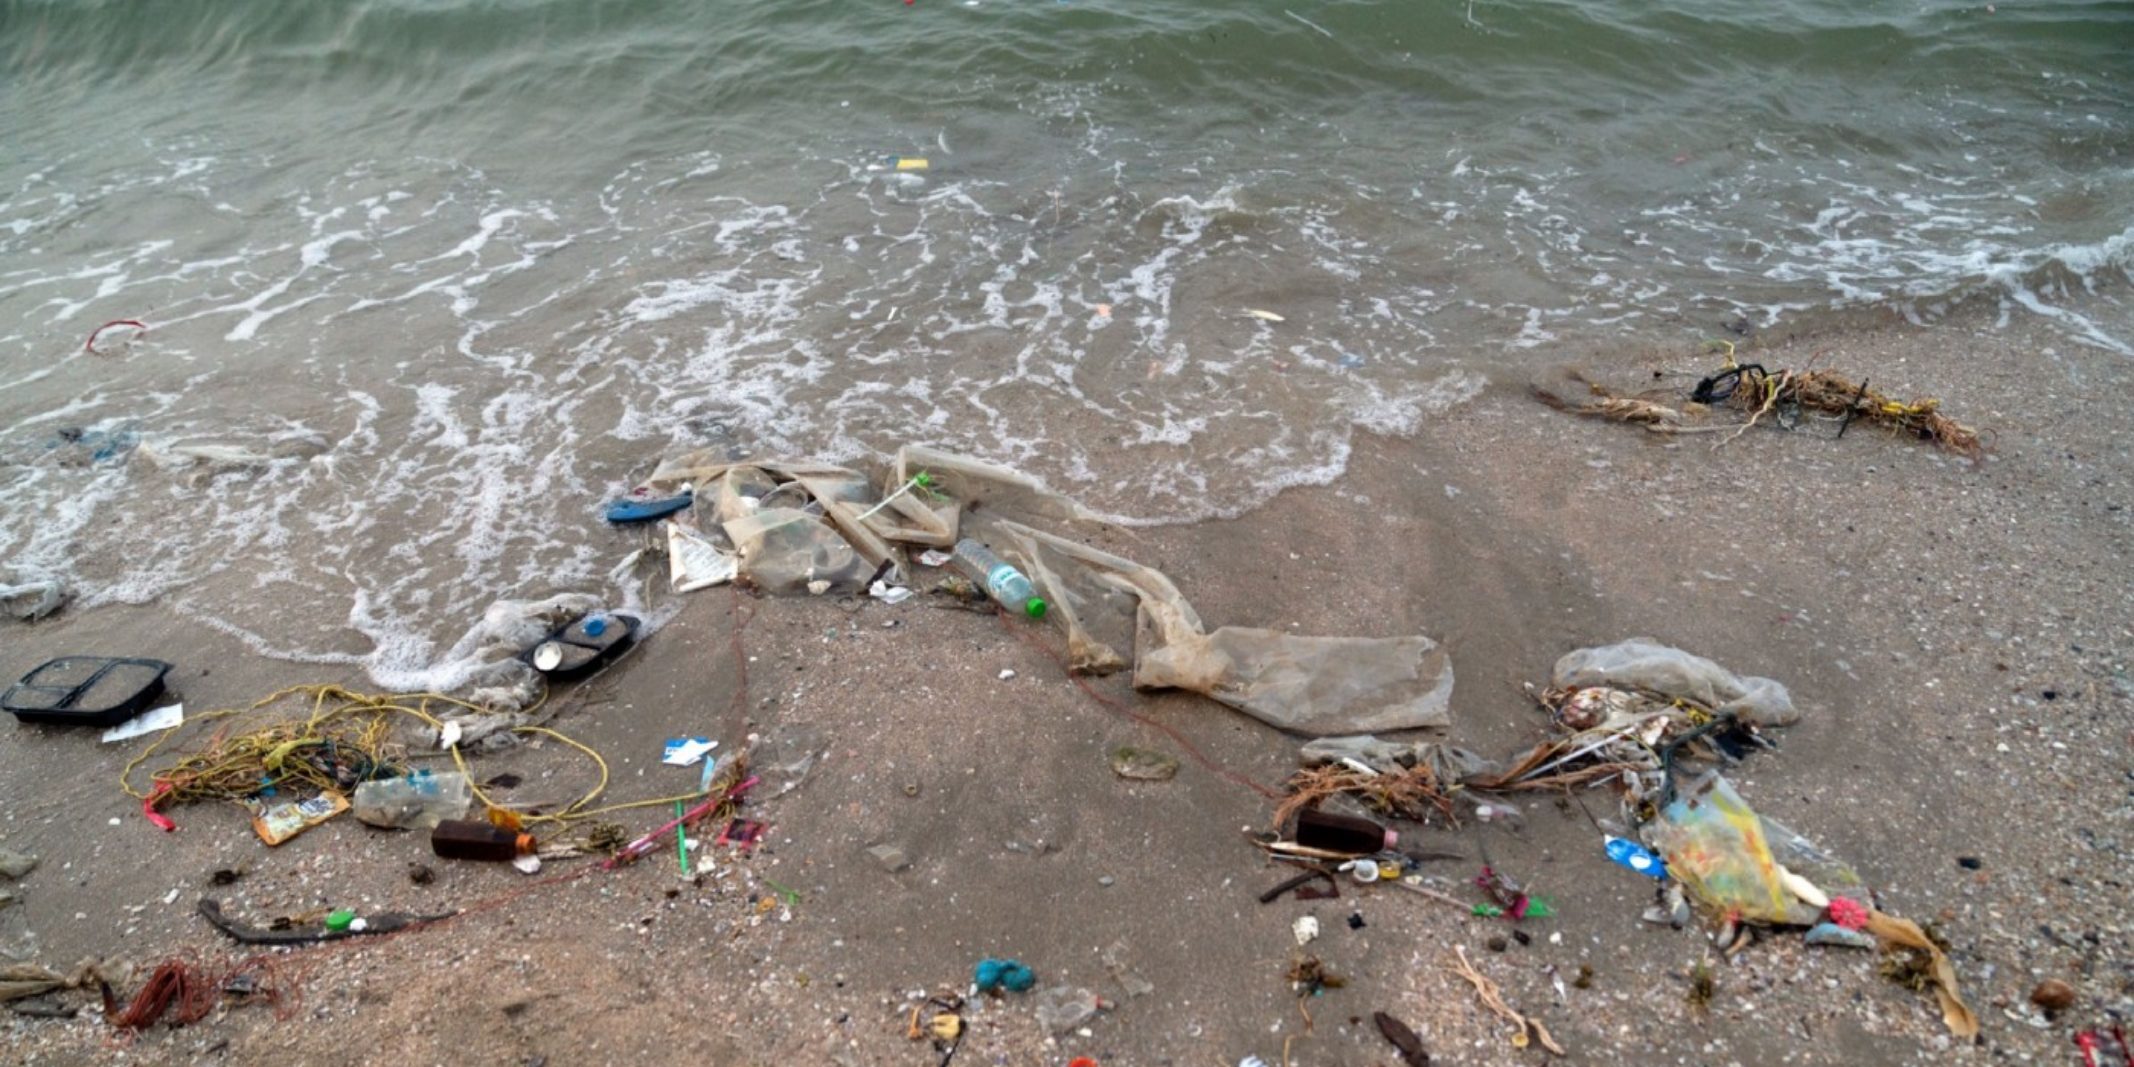 Piles of trash including plastic bottles, bags, and straws wash up on the beach.